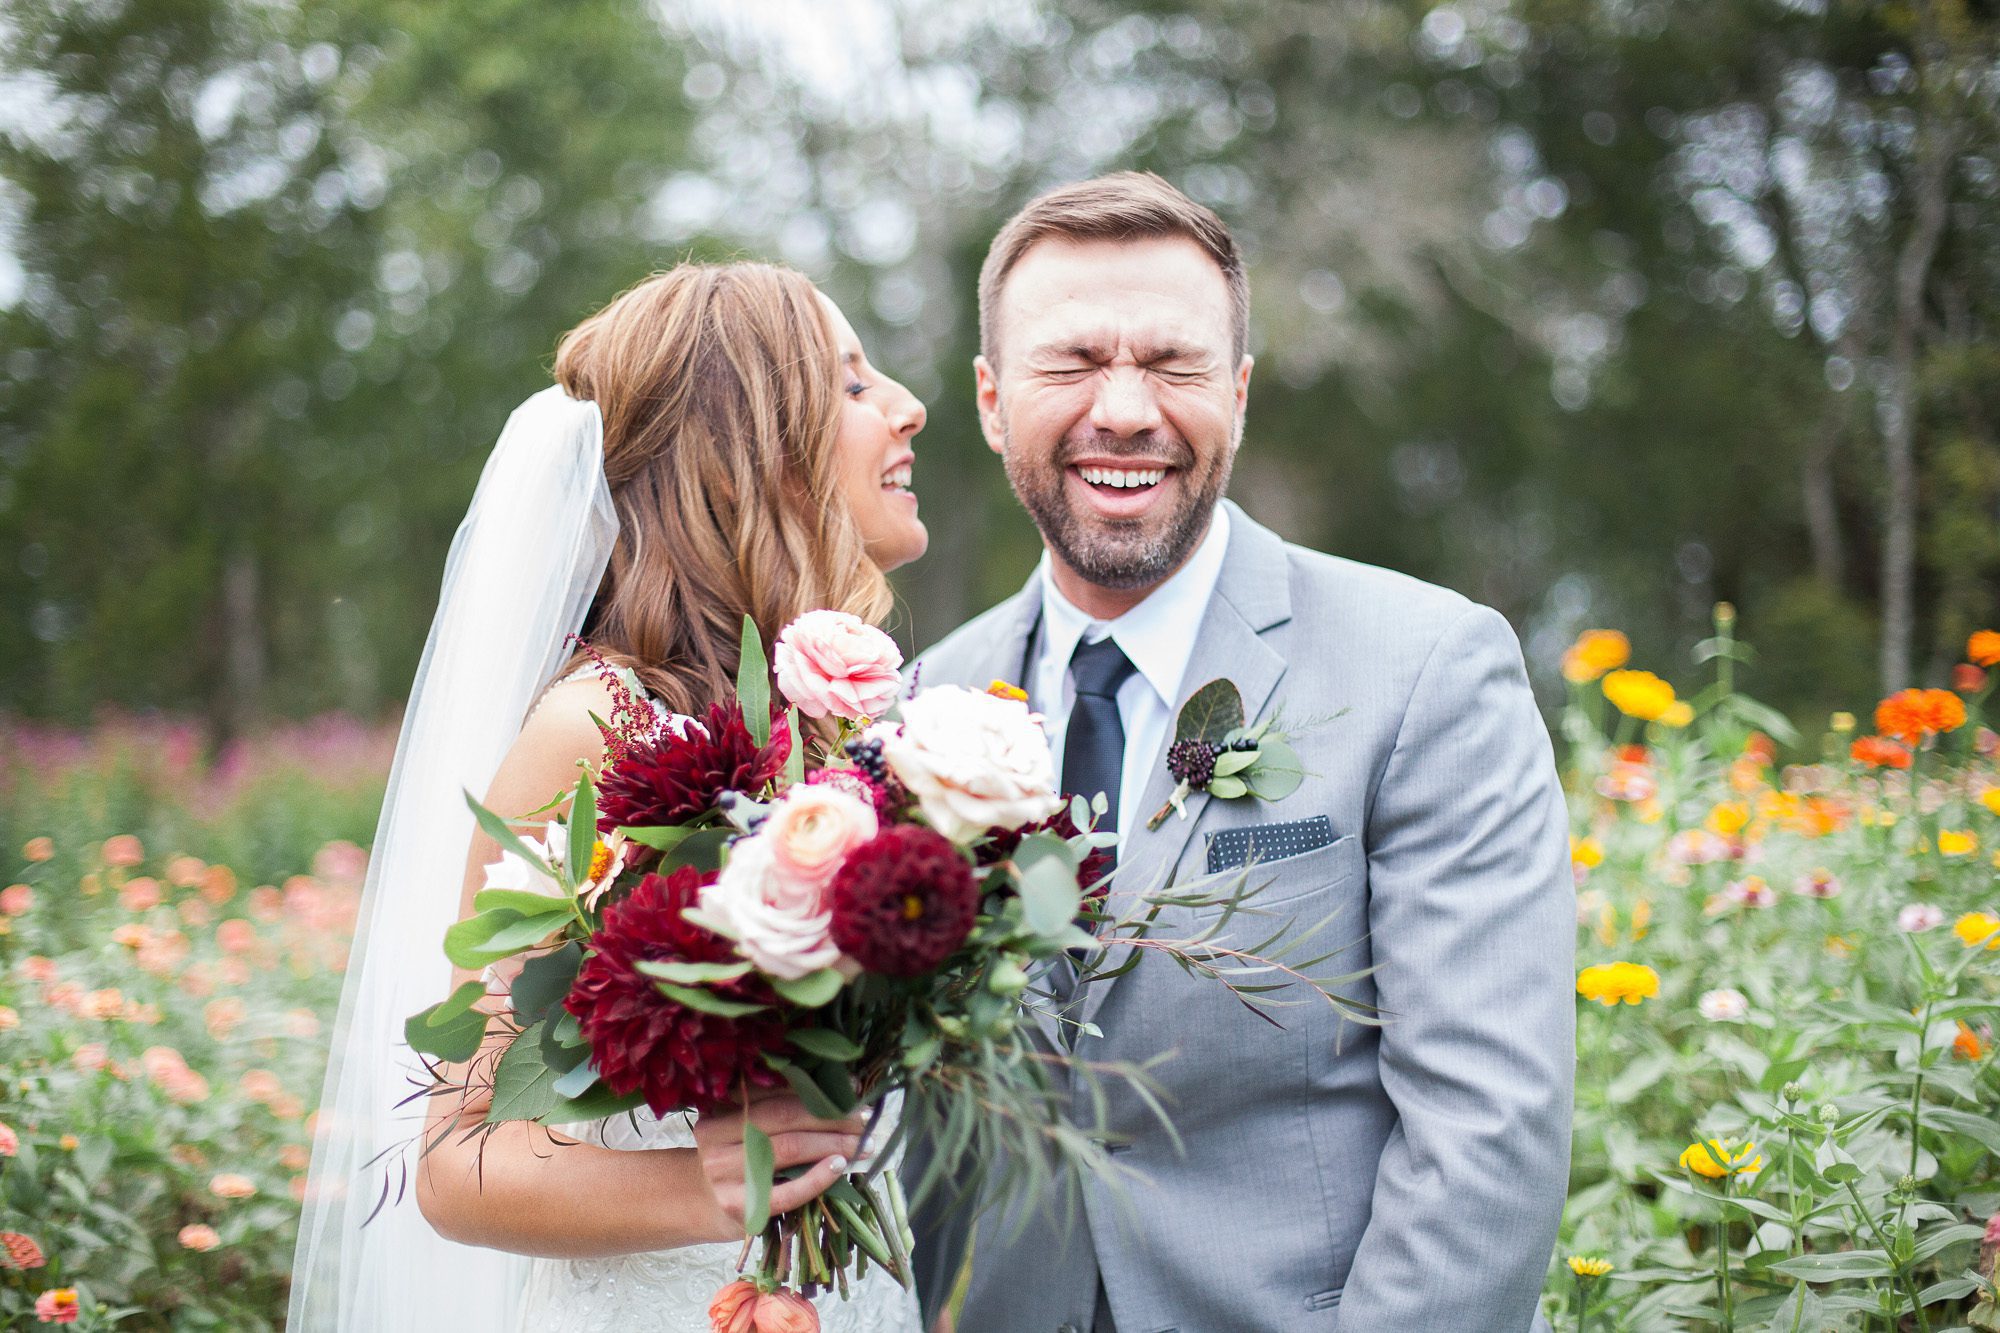 Bride and groom share a funny moment after wedding ceremony at Green Door Gourmet wedding in Nashville, TN